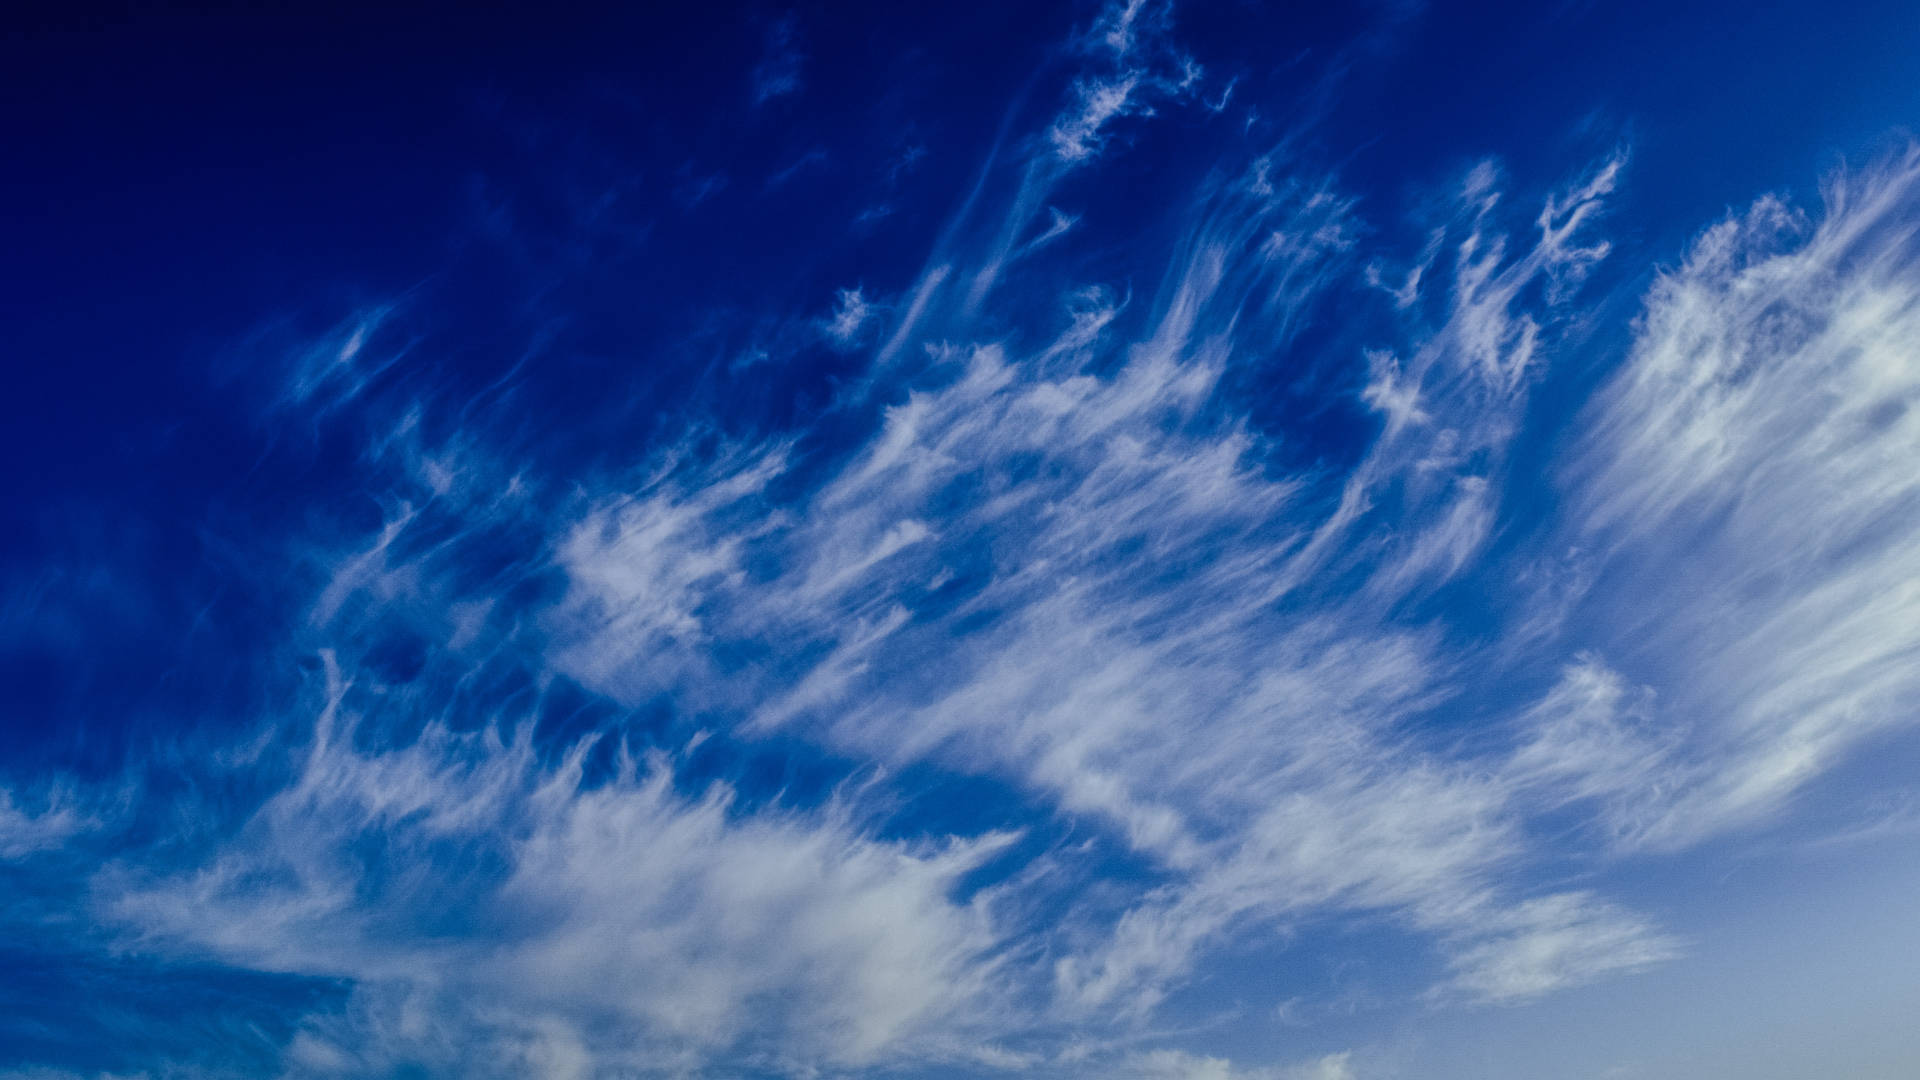 Sky 4959X2789 Wallpaper and Background Image